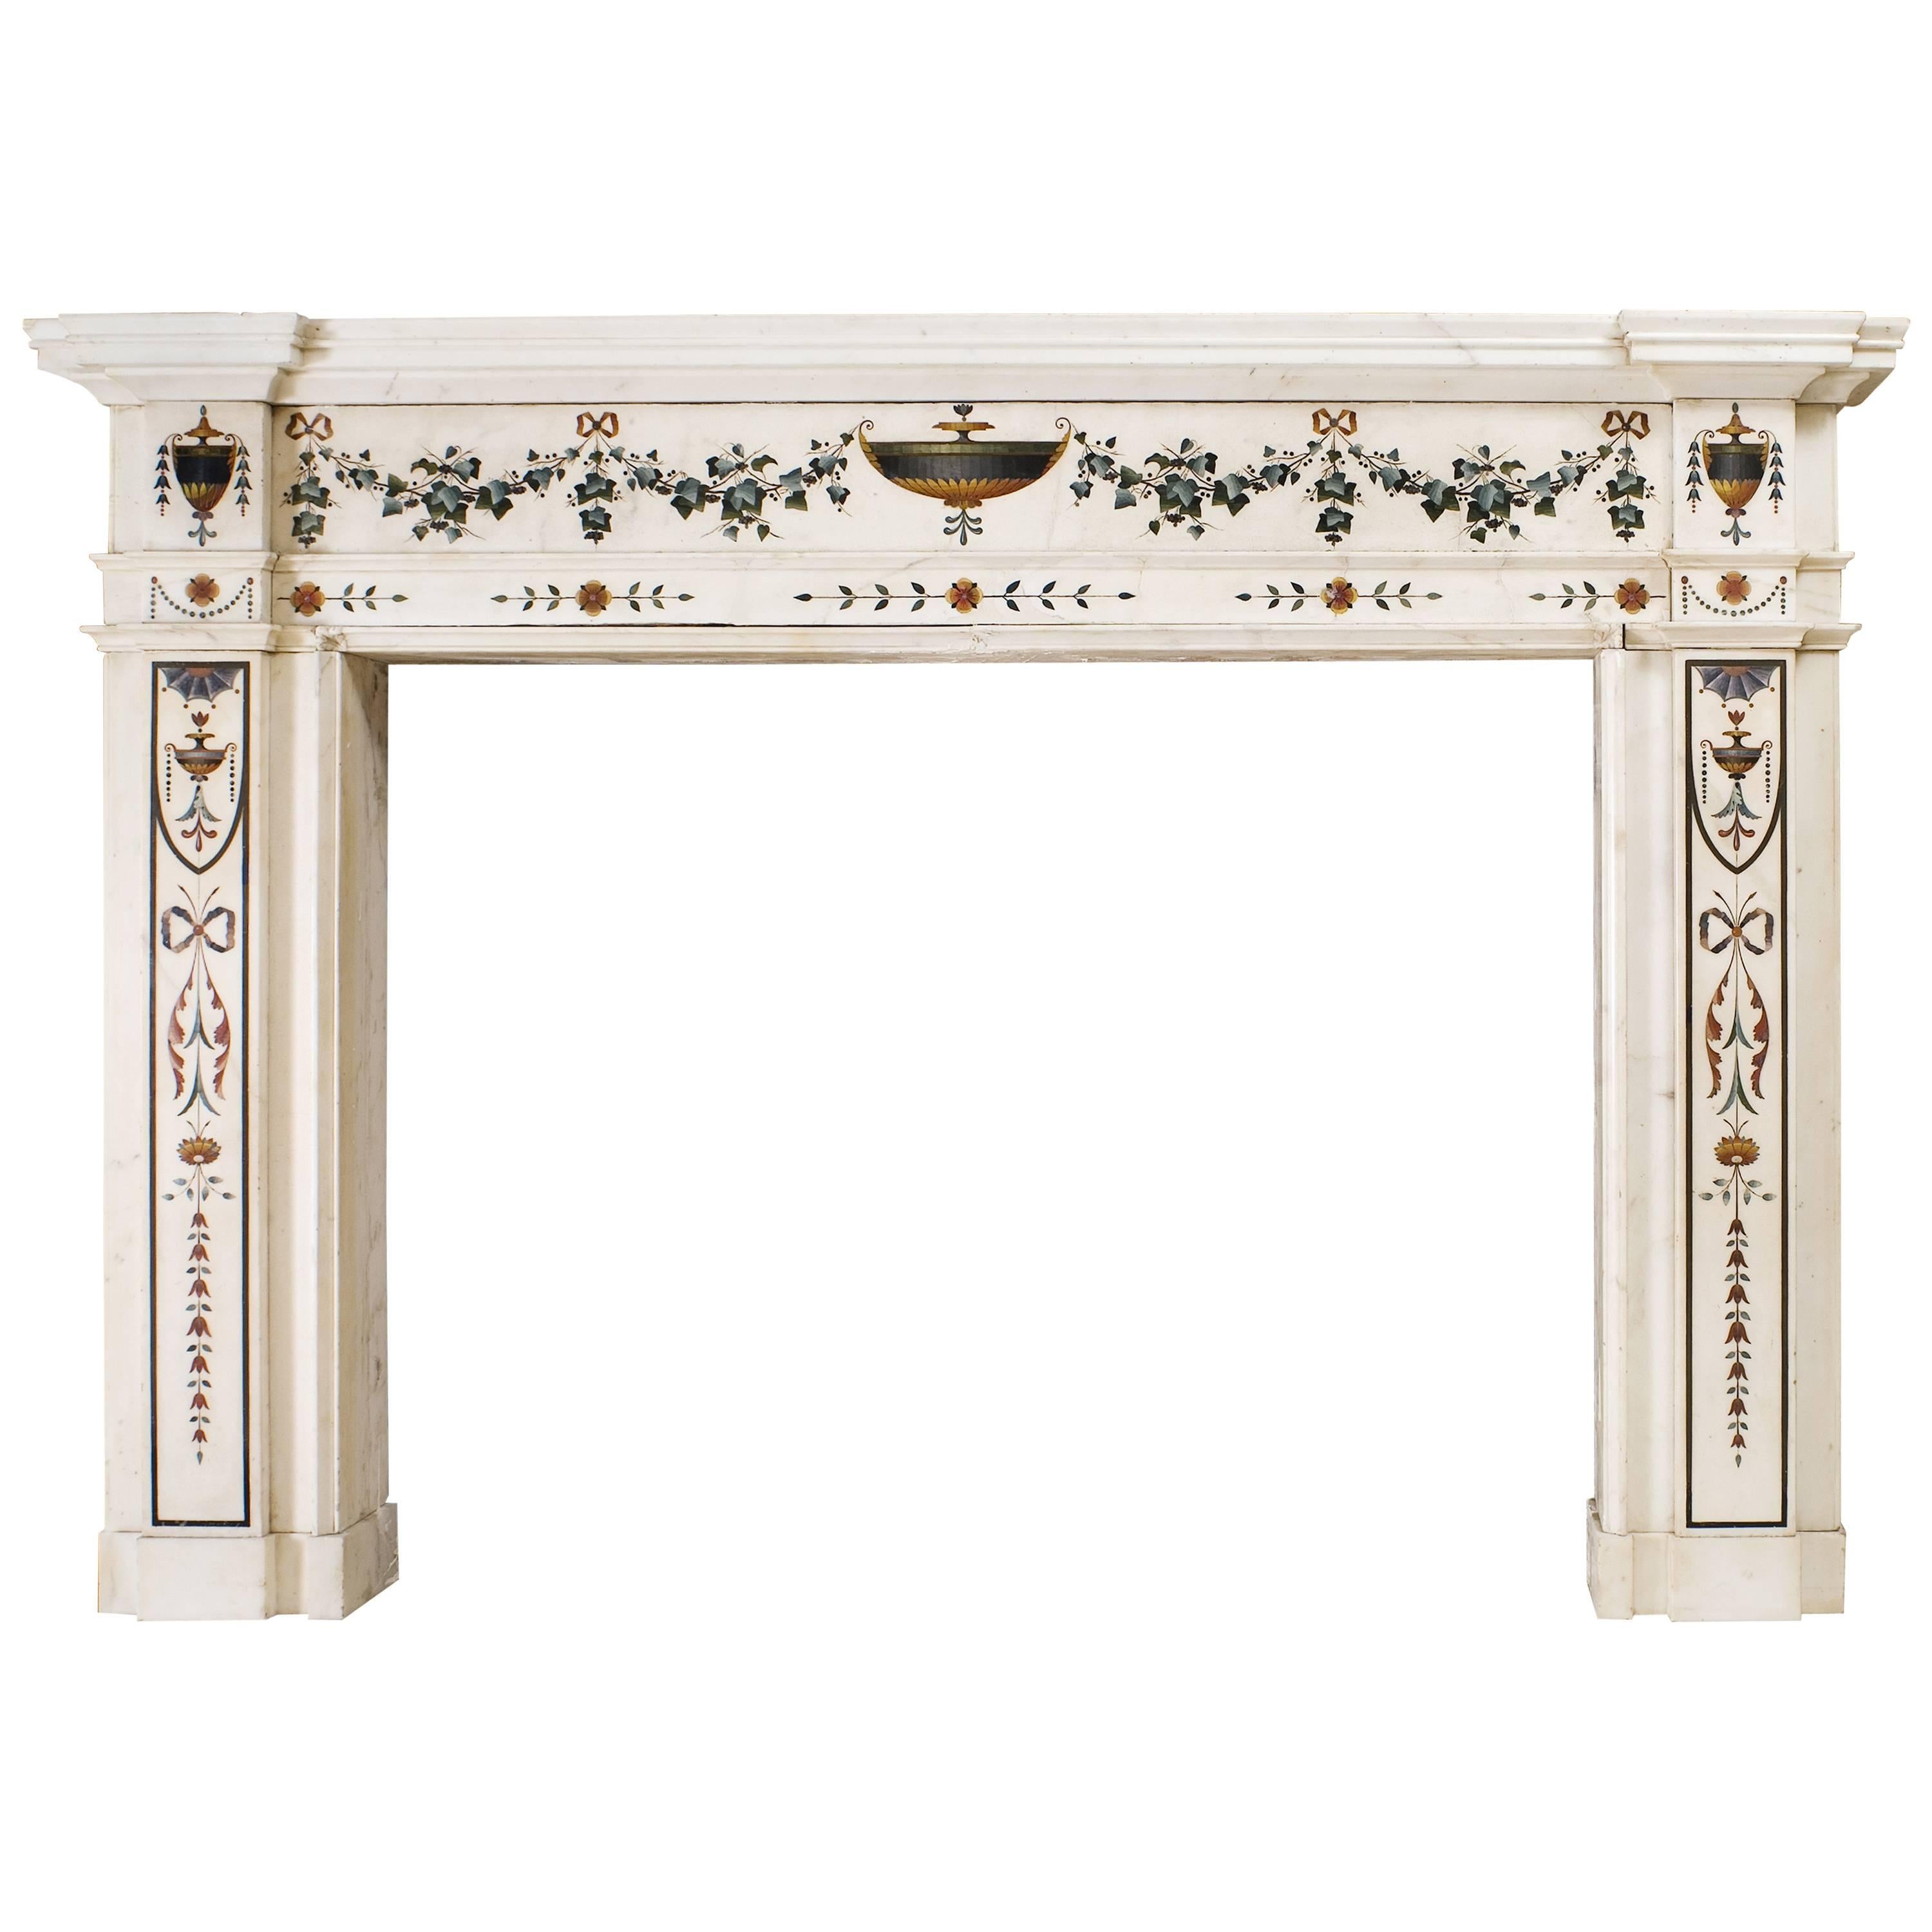 White Marble Fireplace with Pietro Bossi Scagliola Inlays, Late 18th Century For Sale